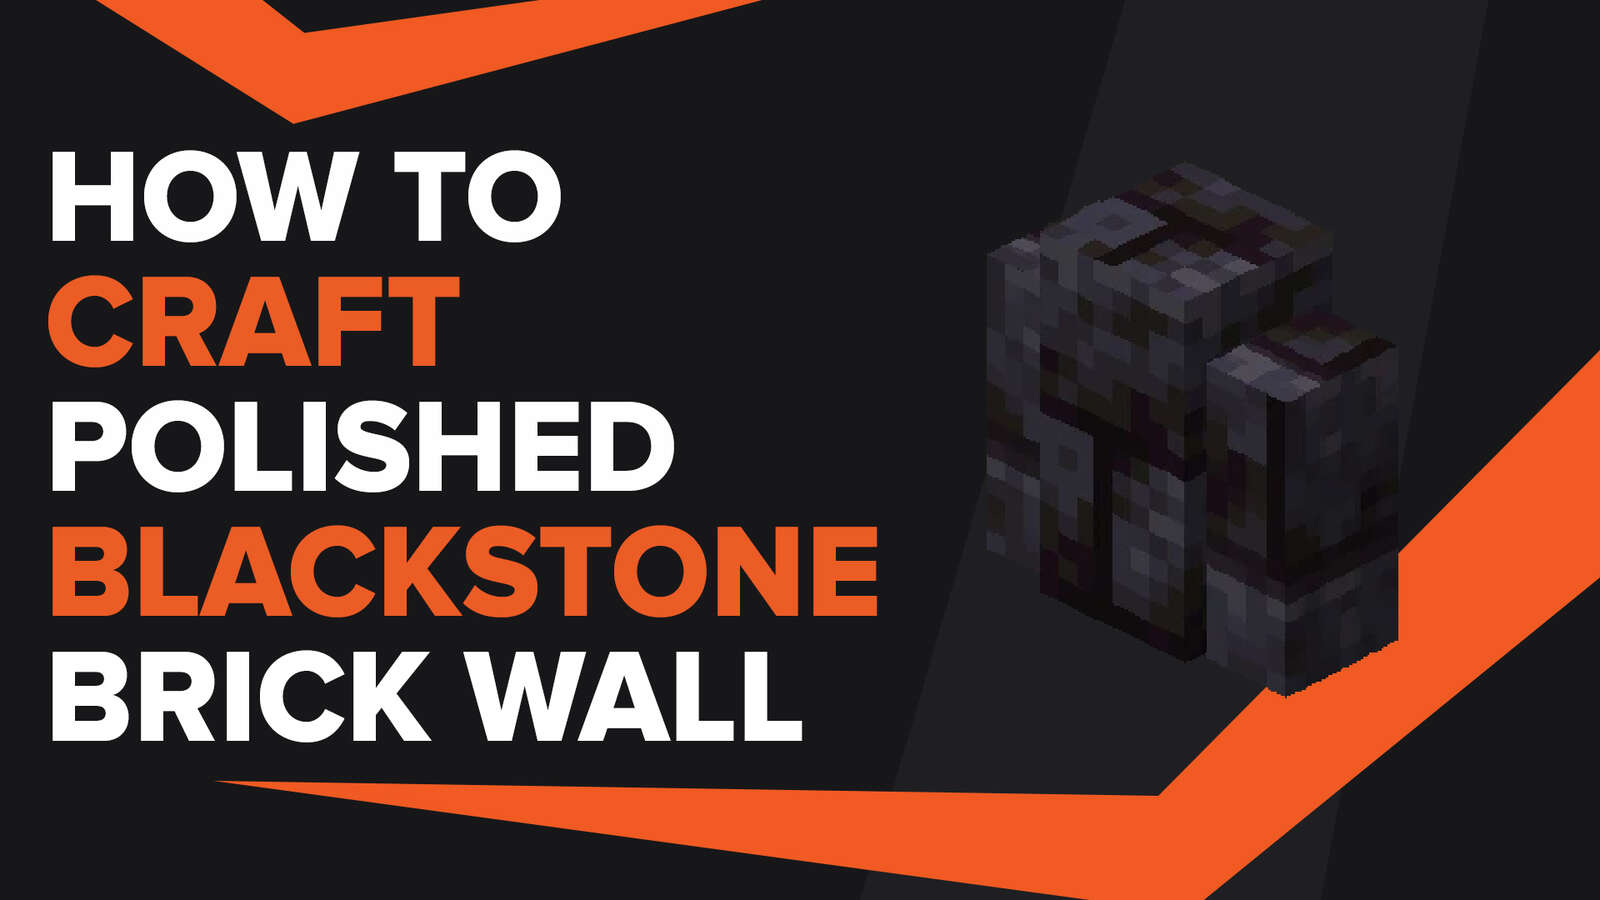 How To Make Polished Blackstone Brick Wall In Minecraft